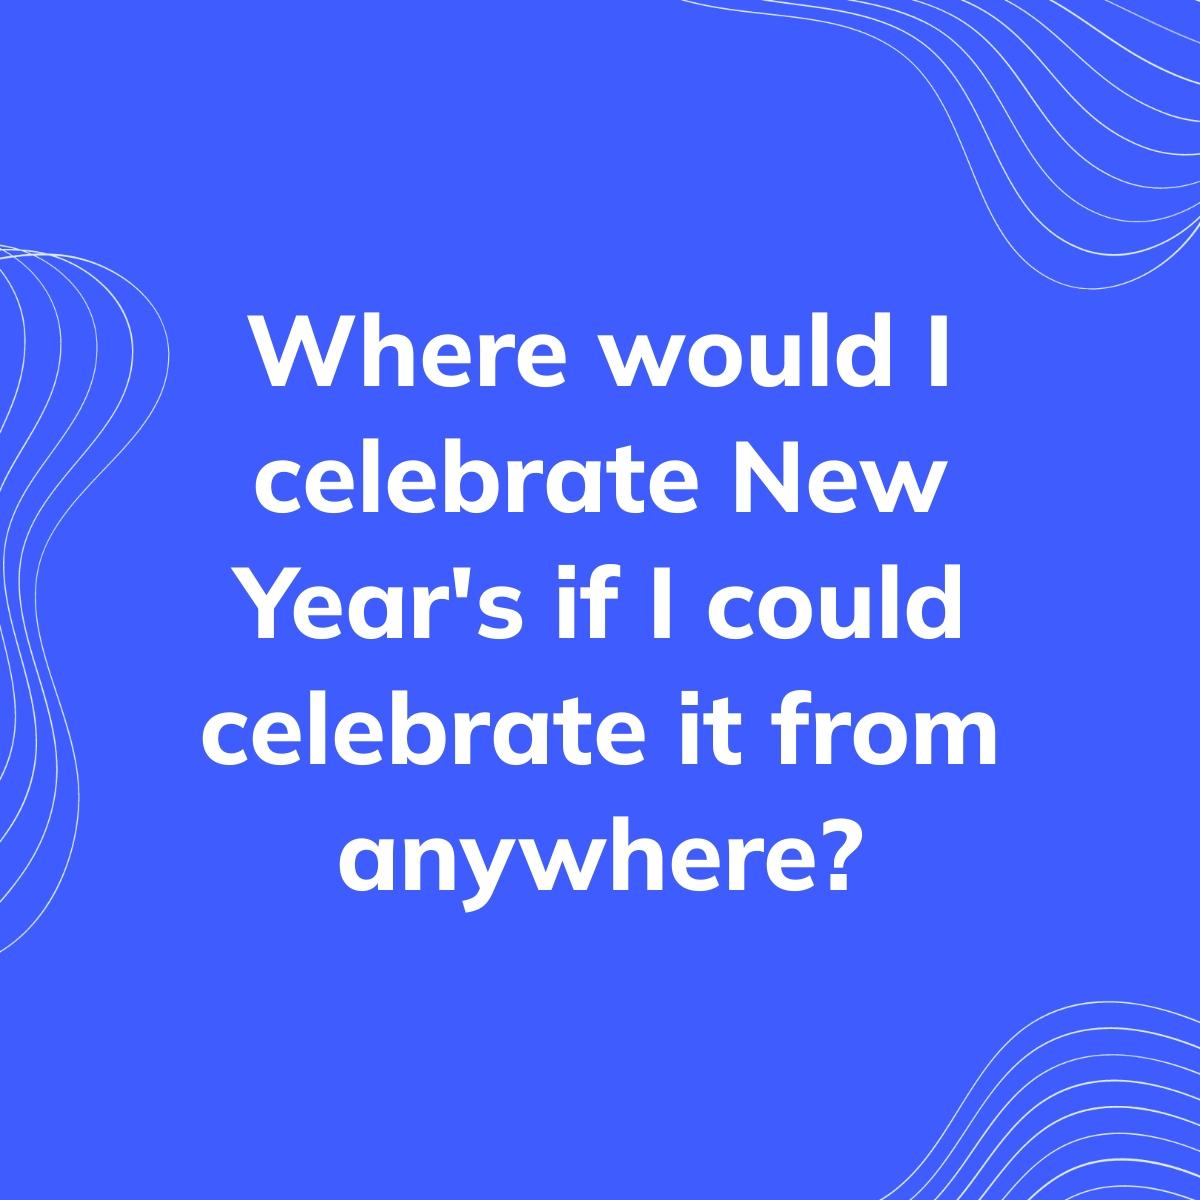 Journal Prompt: Where would I celebrate New Year's if I could celebrate it from anywhere?